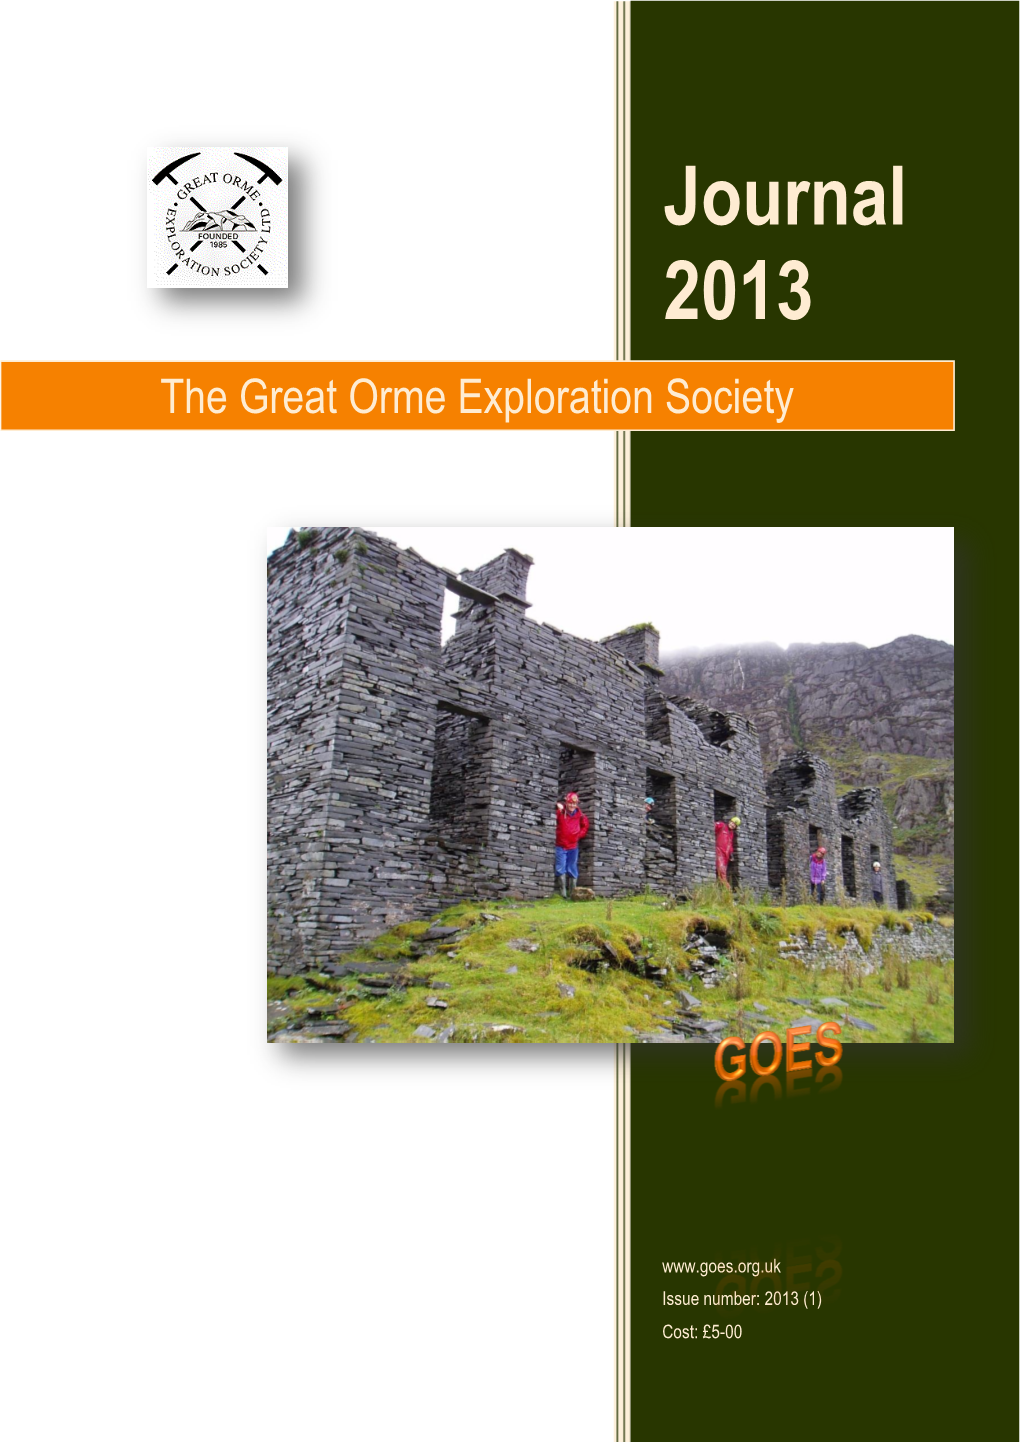 The Journal of the Great Orme Exploration Society 2013